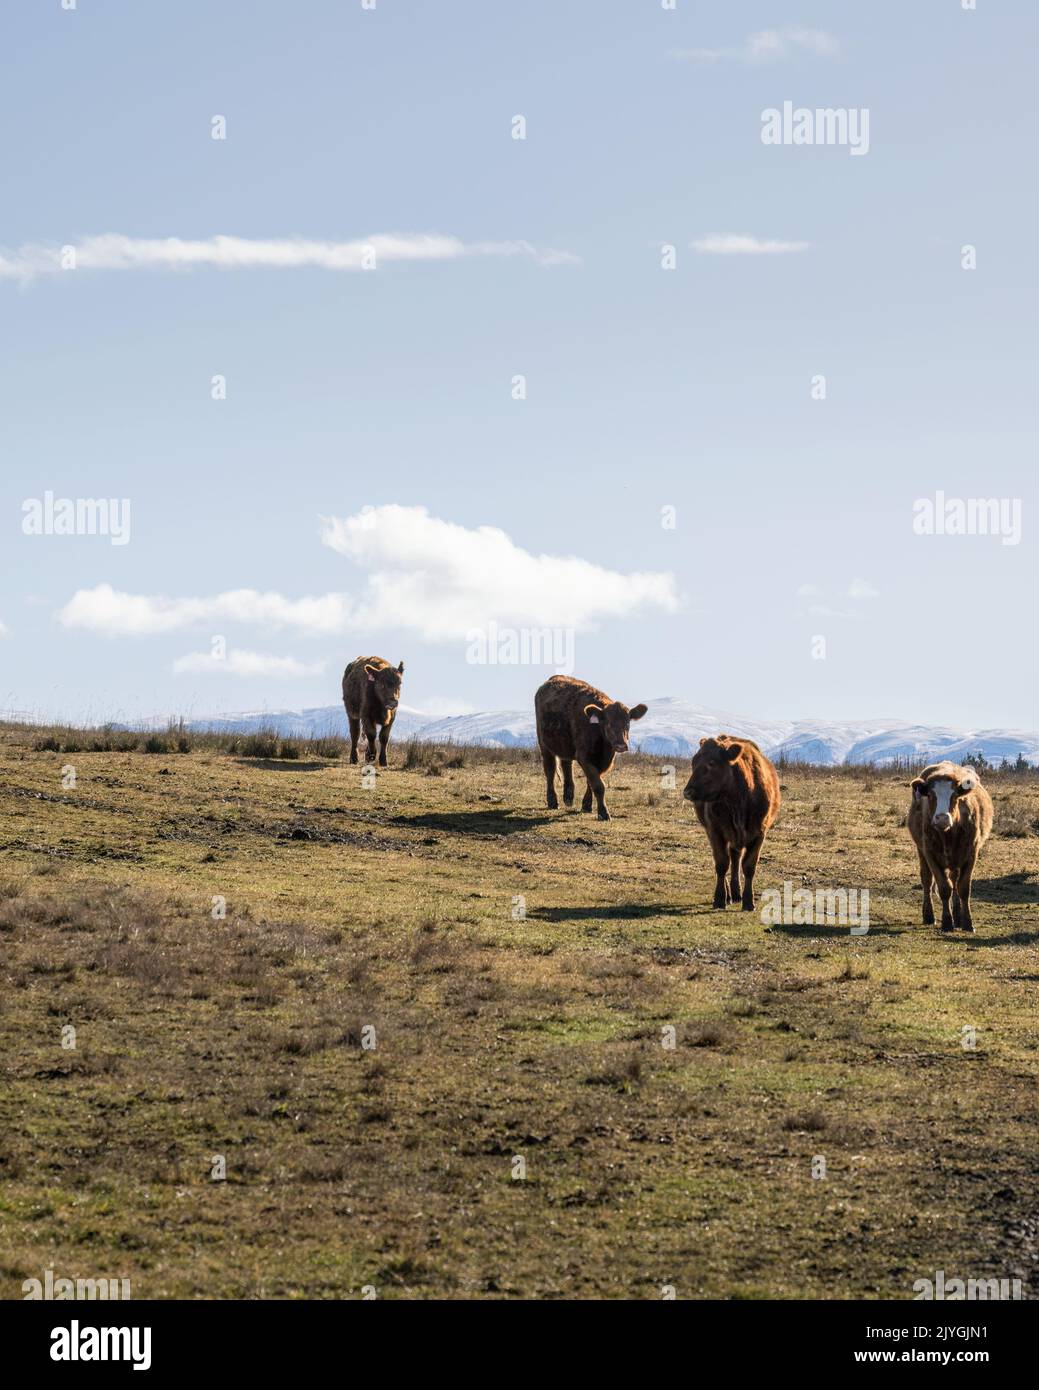 Cattle grazing on the hill, snow-capped mountains in the distance. Central Otago. Vertical format. Stock Photo